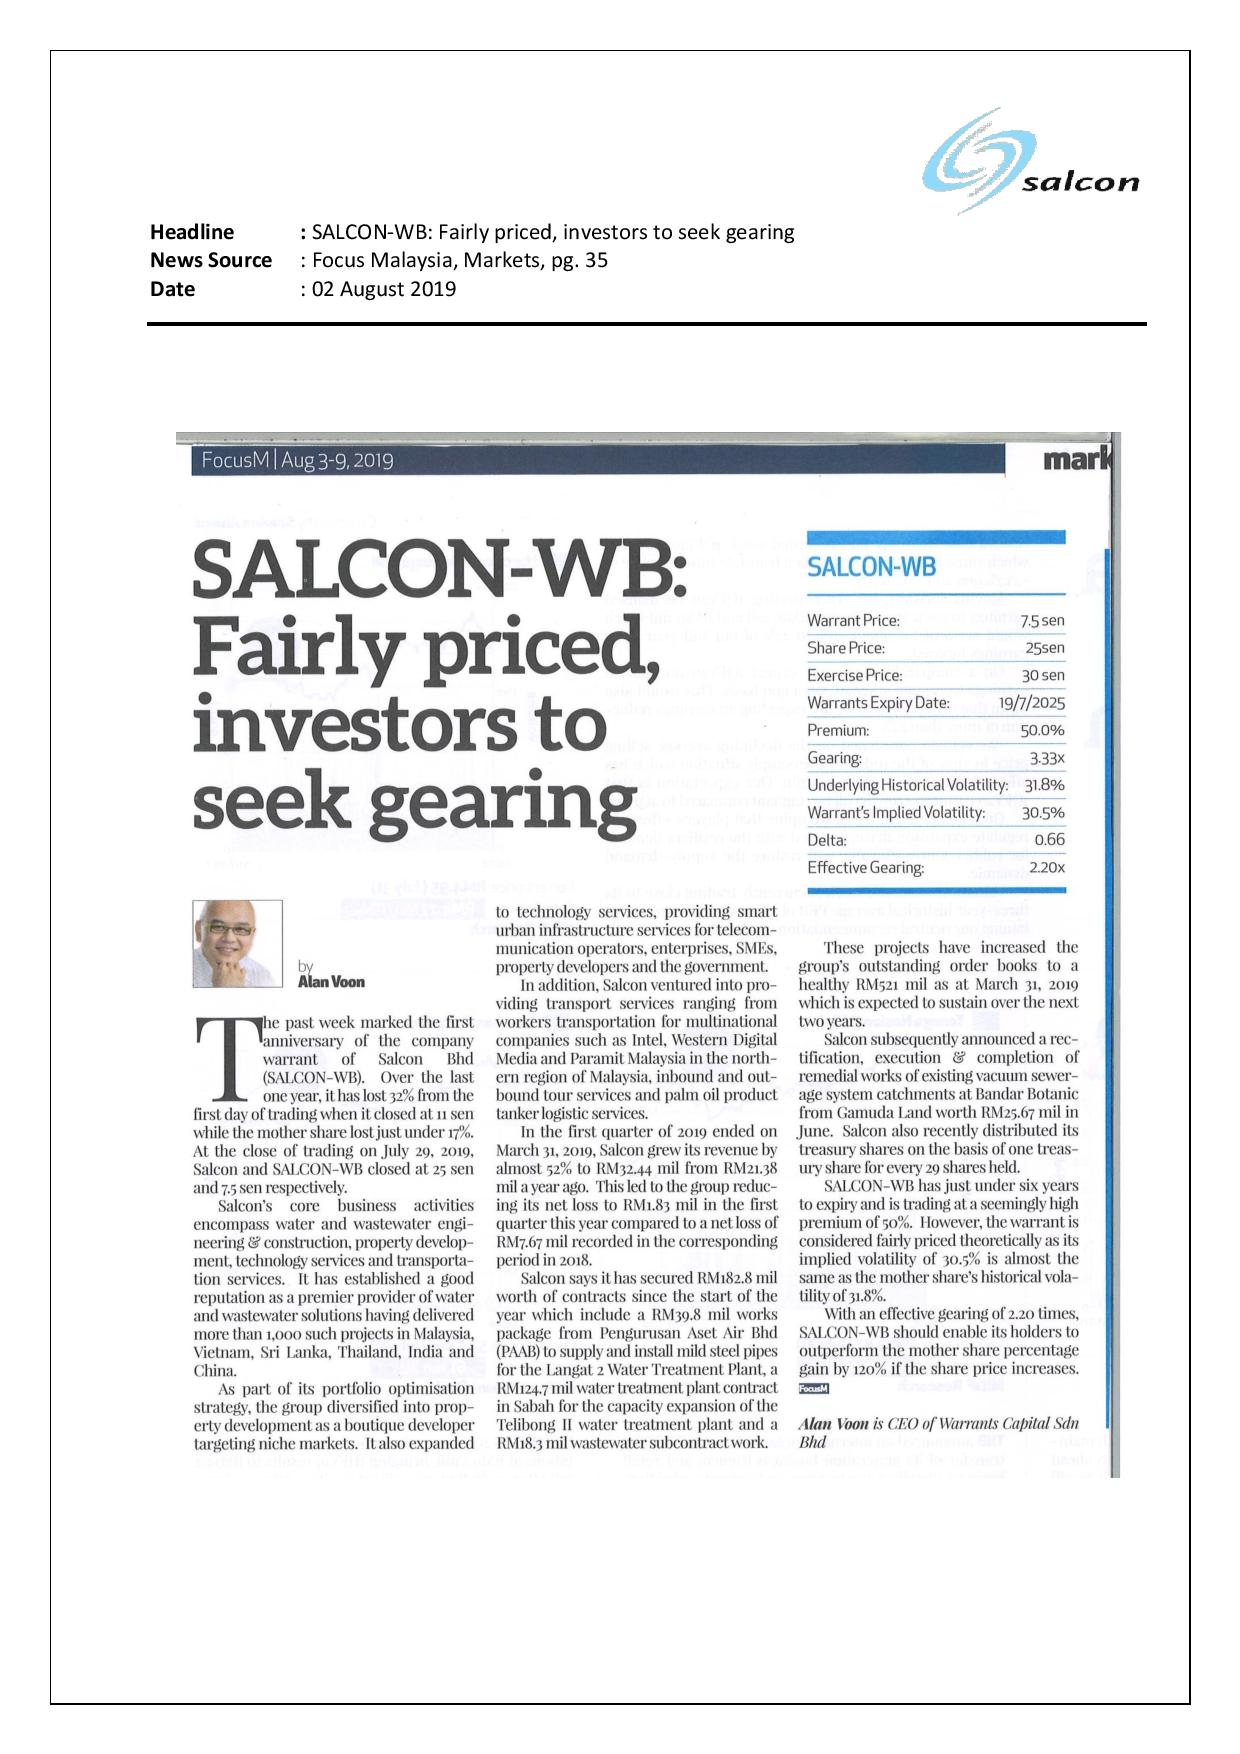 Salcon-WB: Fairly priced, investors to seek gearing